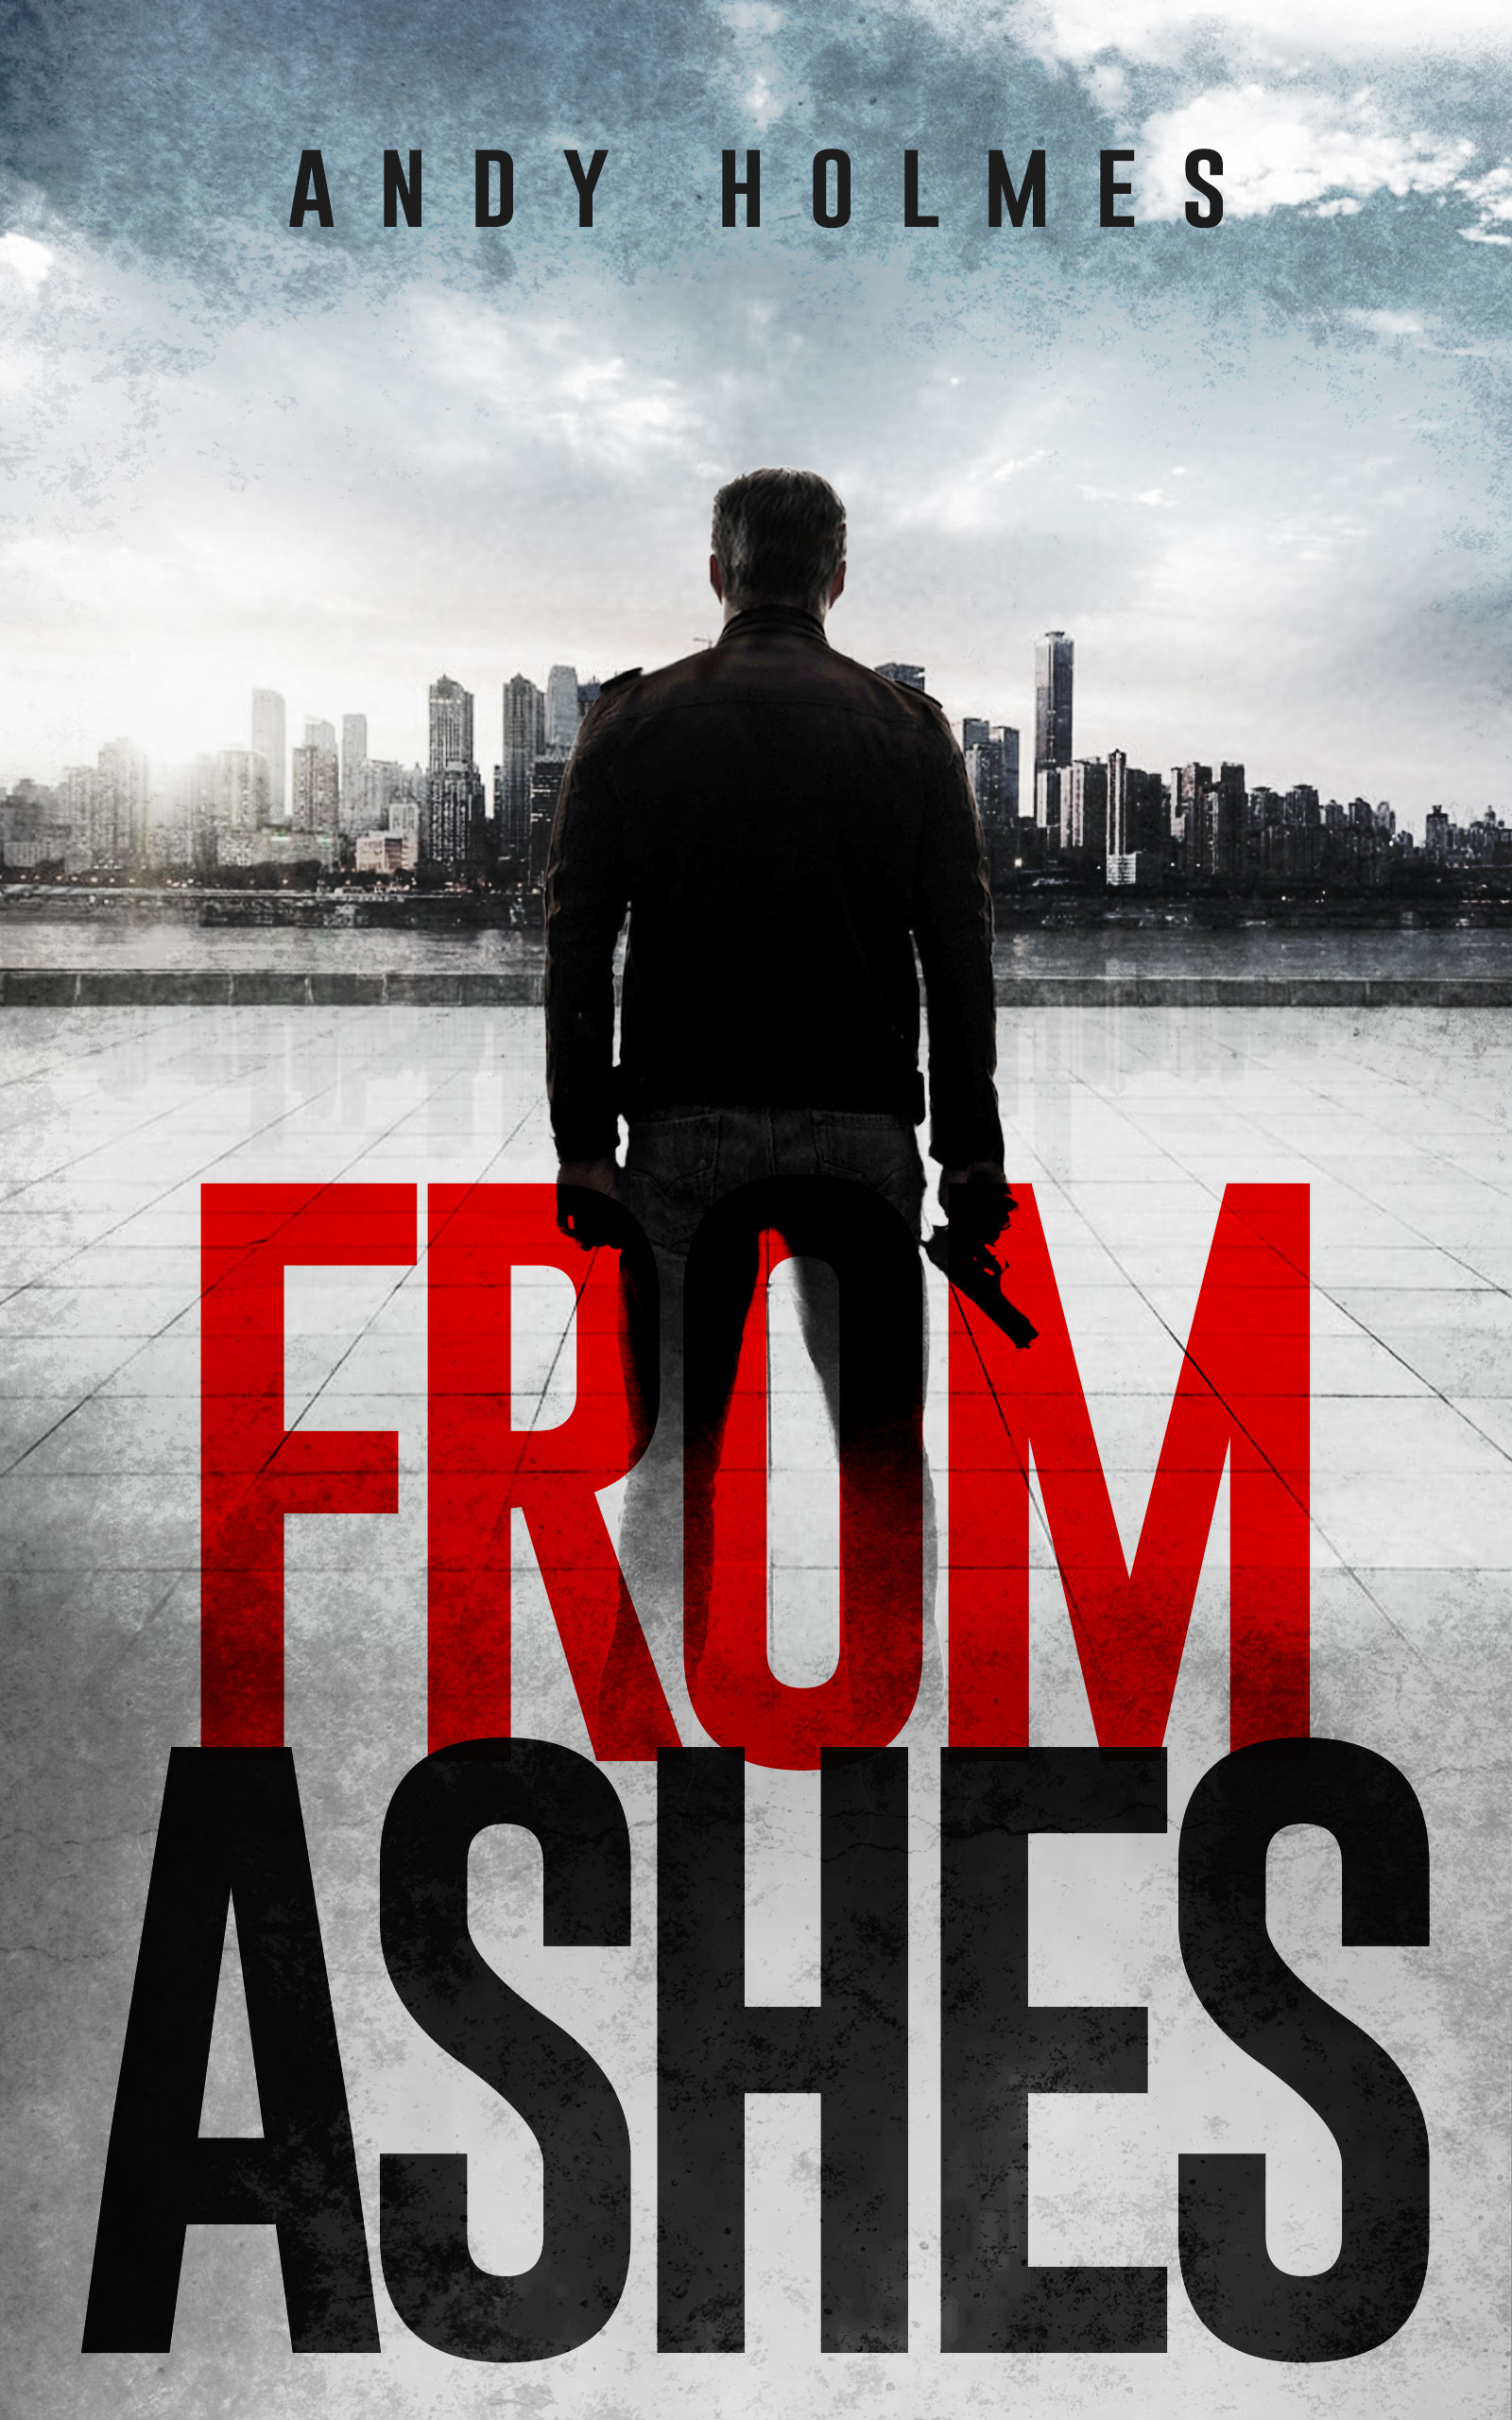 FREE: From Ashes by Andy holmes